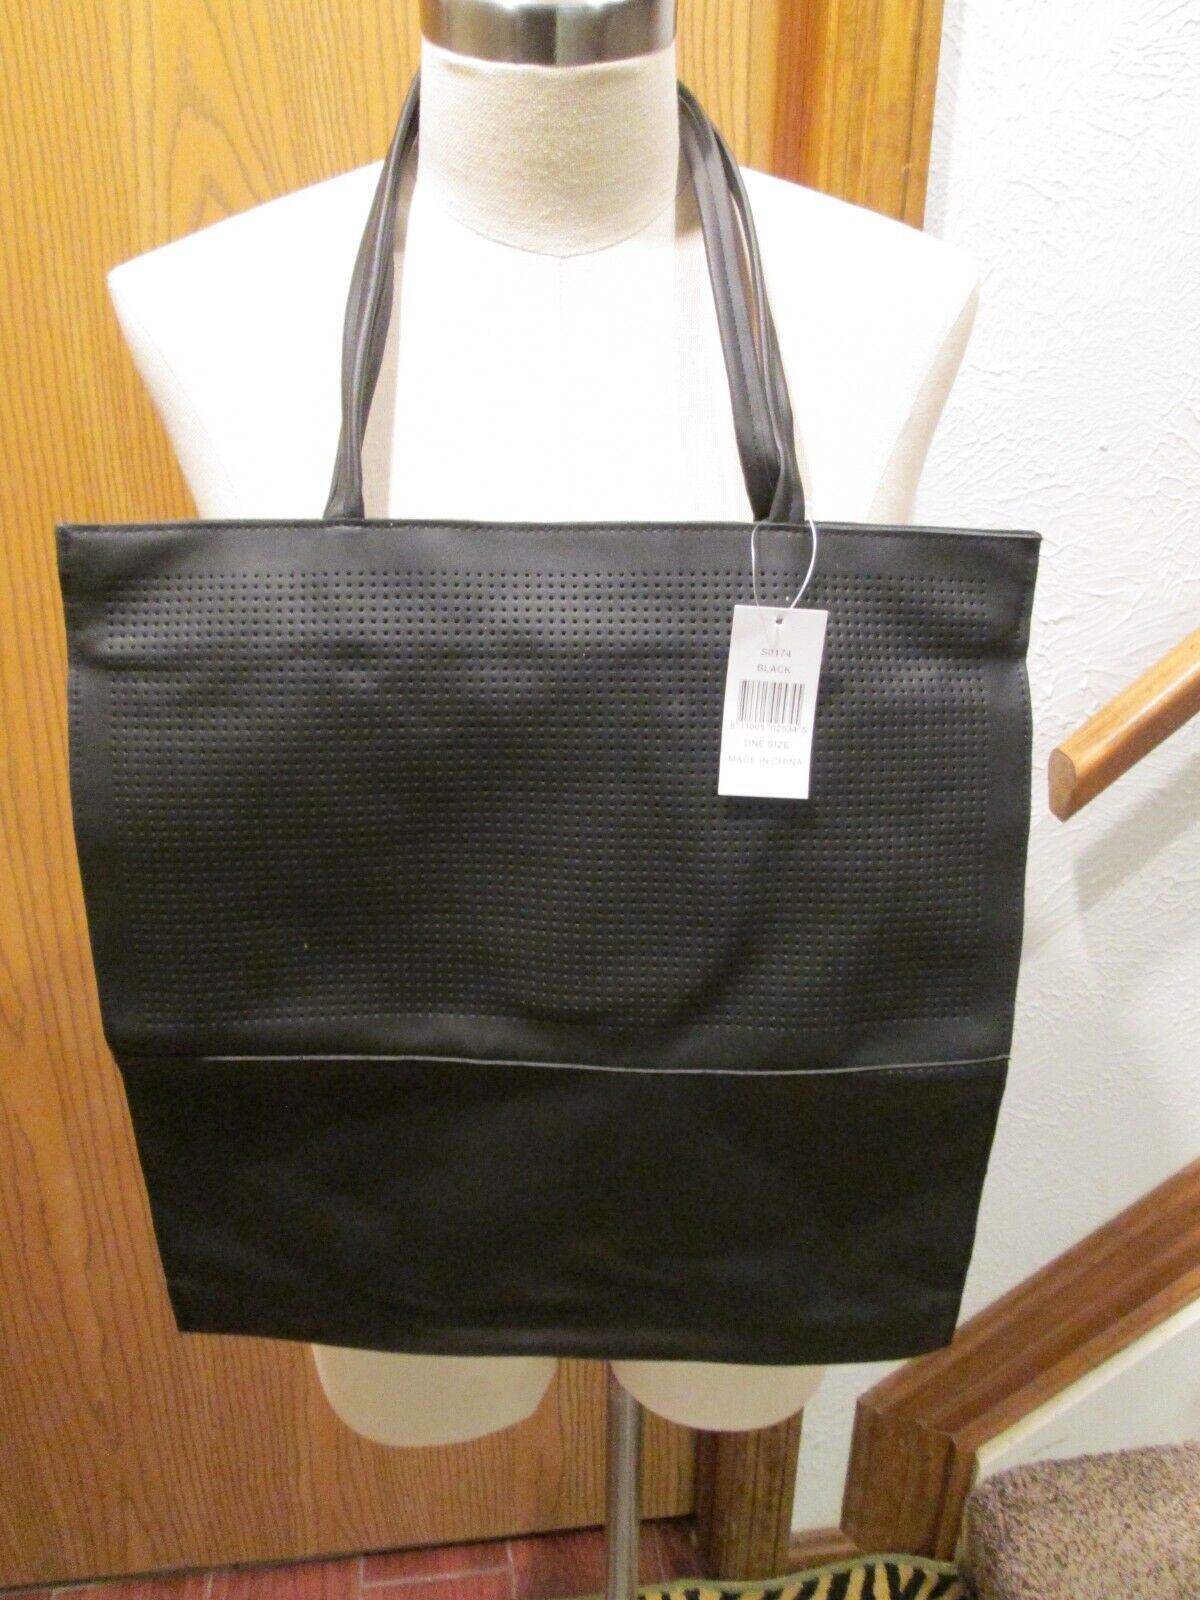 Saks Fifth Avenue Black Faux Leather Tote Bag w/Mess Front NEW